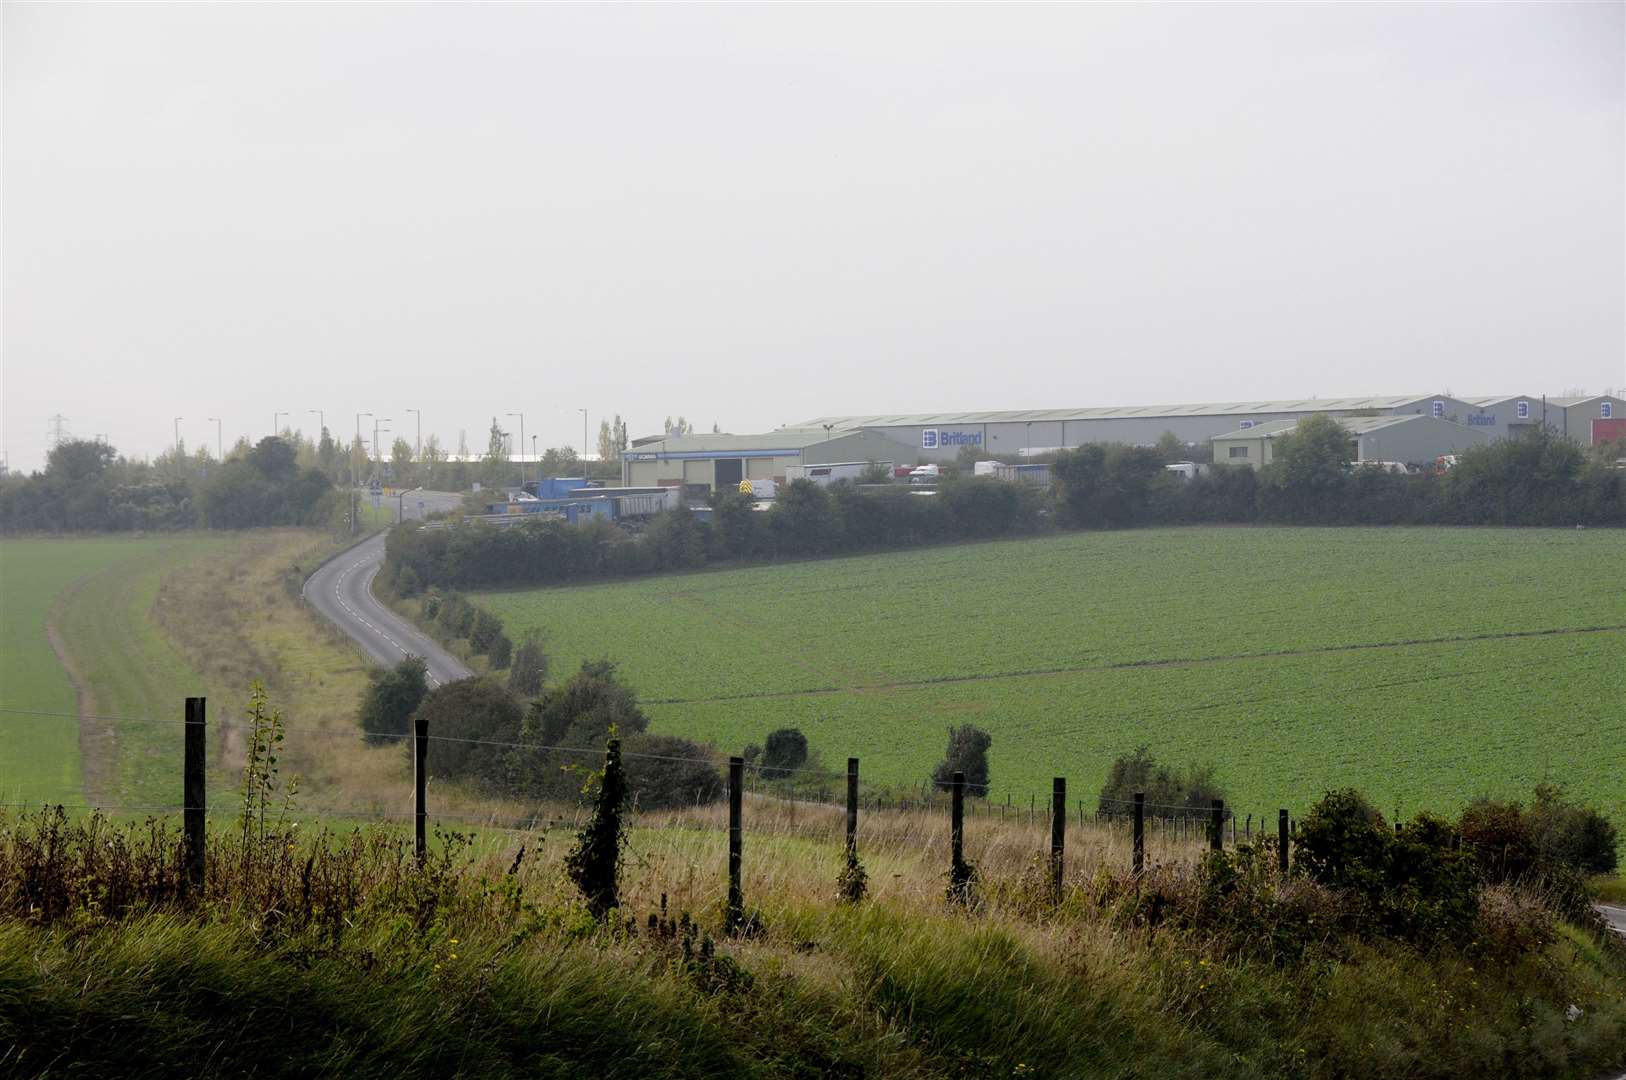 The view riders can expect to see when they ride to the site of the former Tilmanstone Colliery